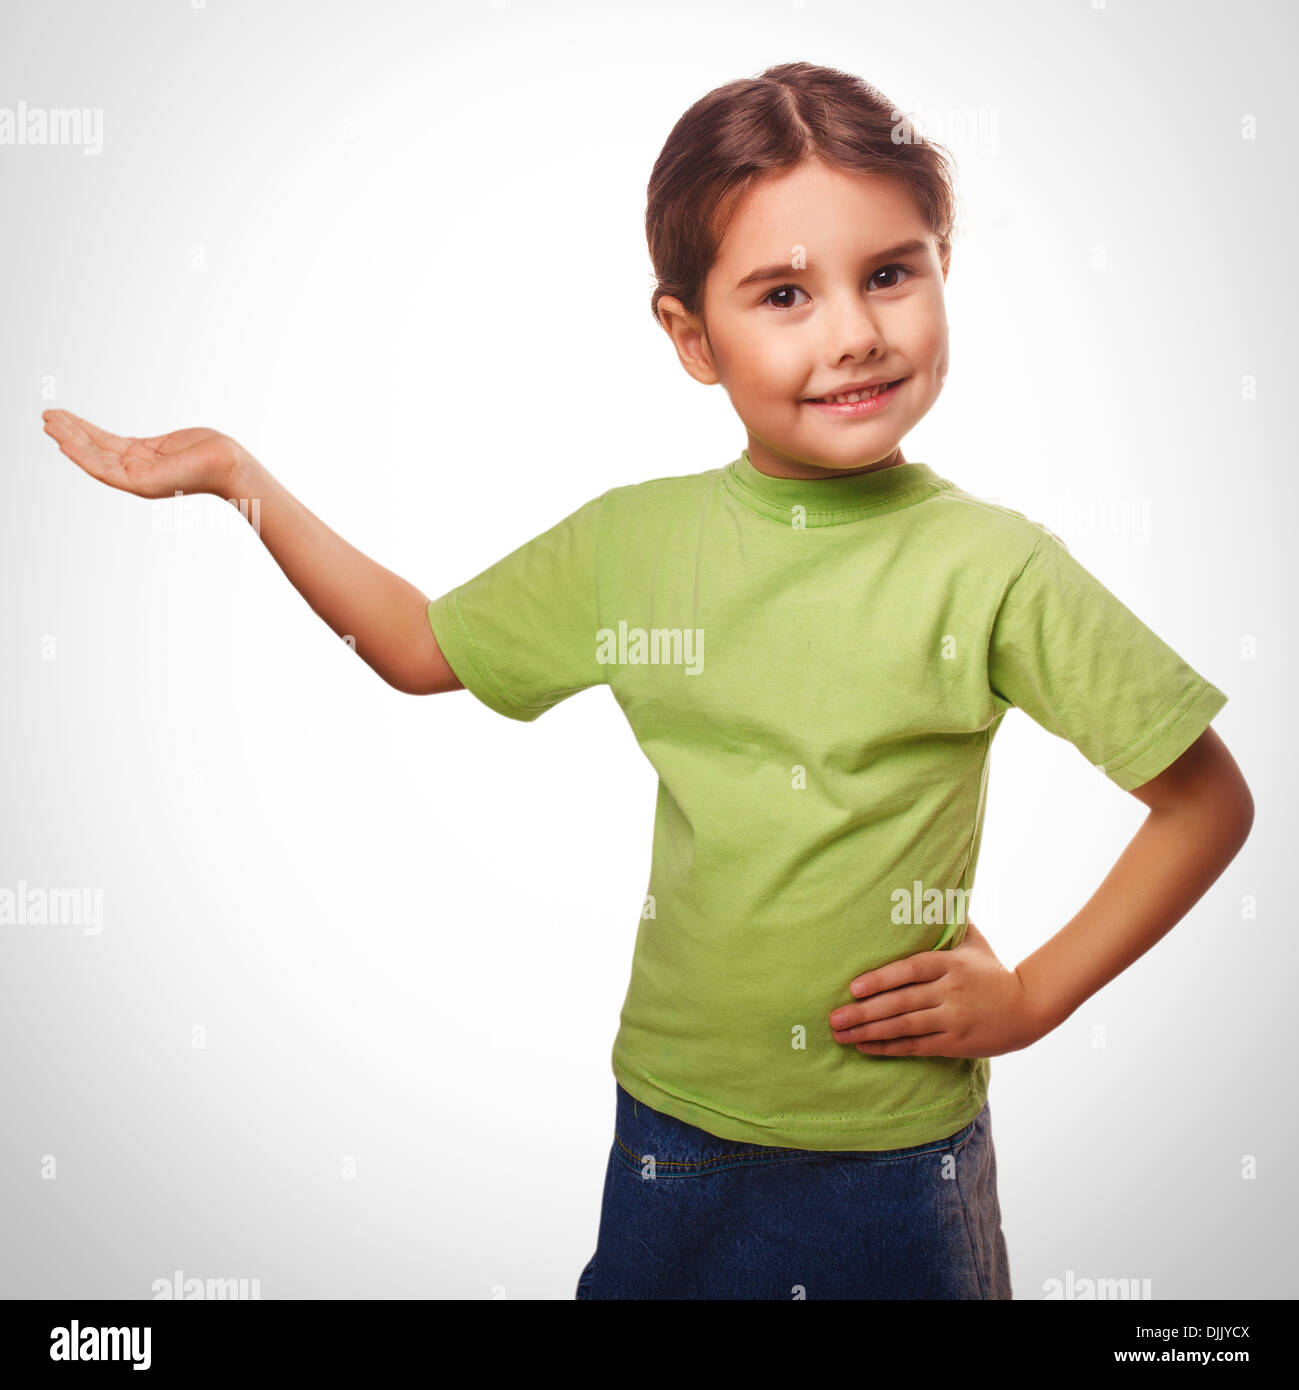 little girl holding an open palm empty hand isolated on white background emotion. Stock Photo